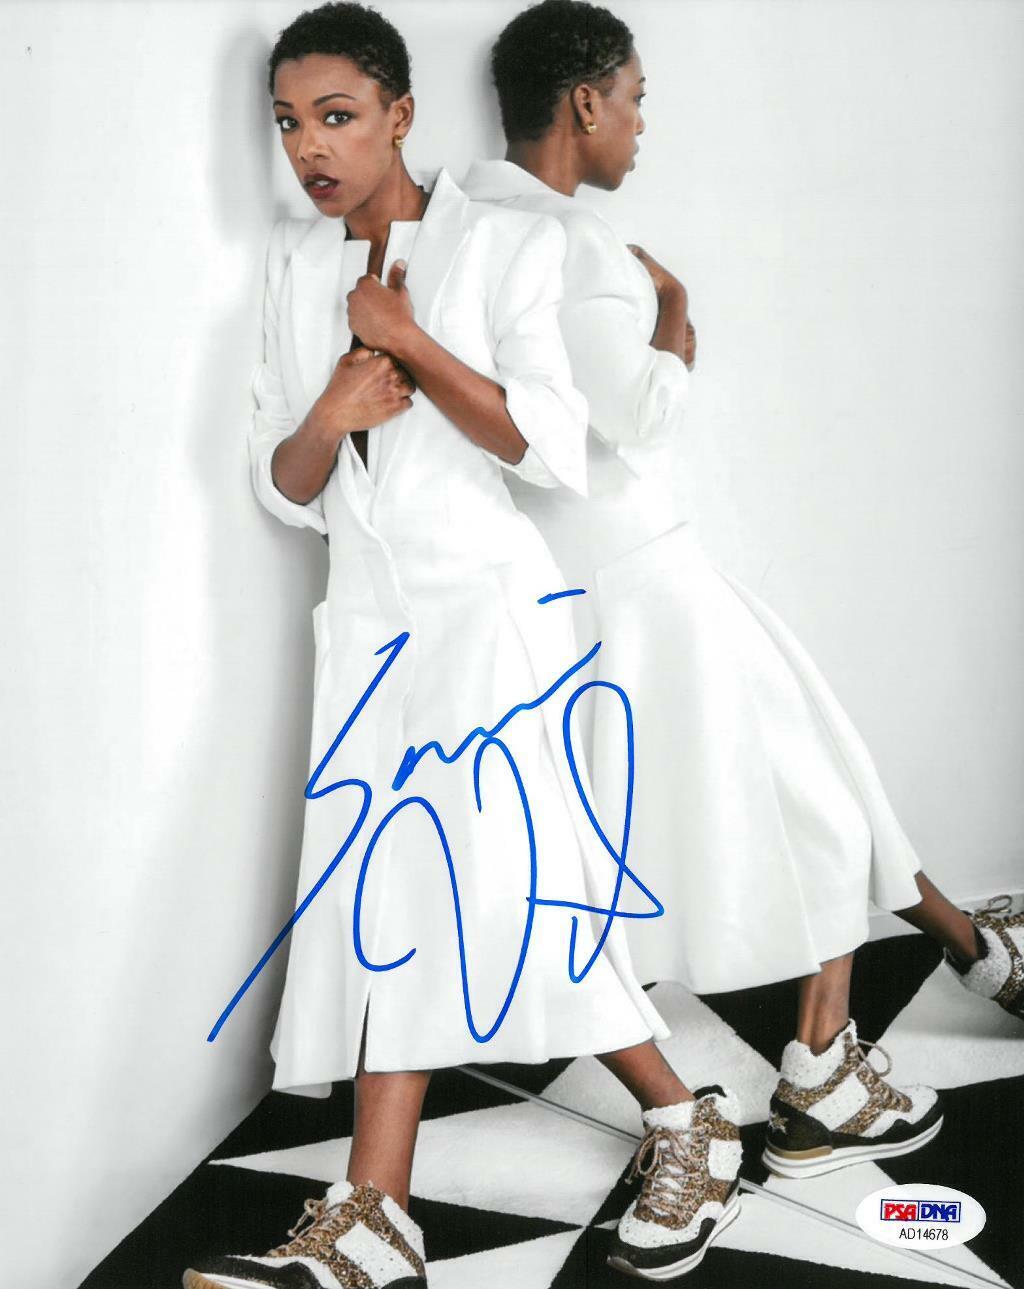 Samira Wiley Signed Authentic Autographed 8x10 Photo Poster painting PSA/DNA #AD14678